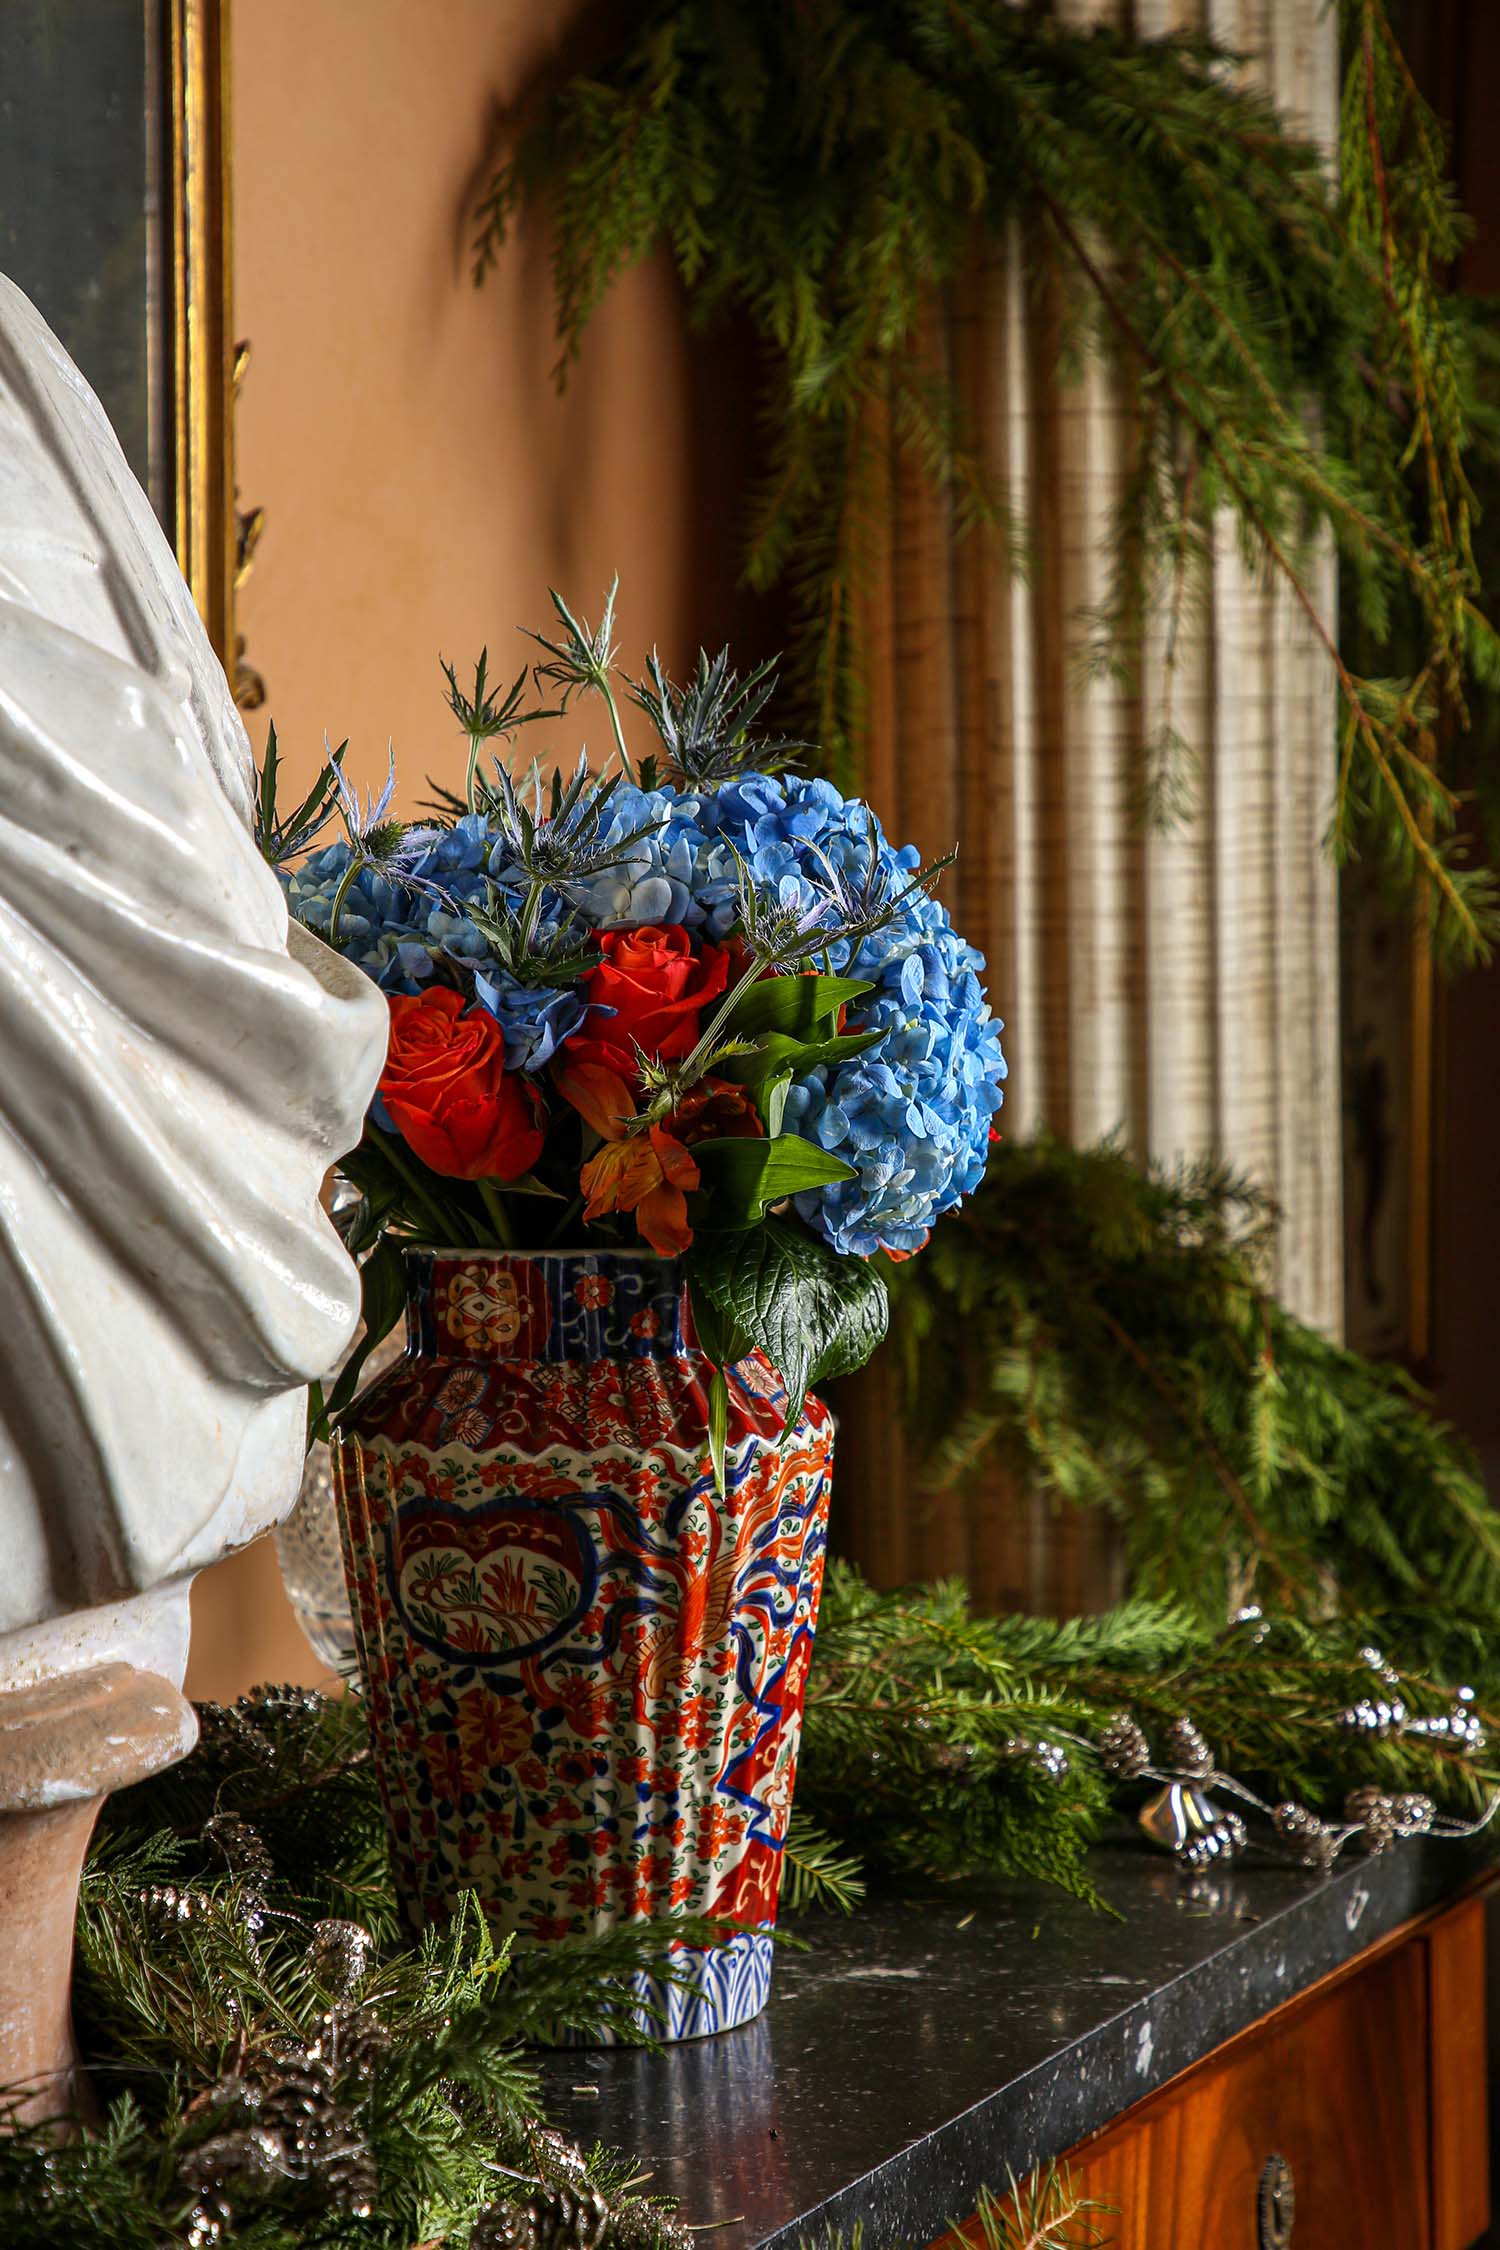 Blue hydrangeas contrast with red roses in an Imari vase.